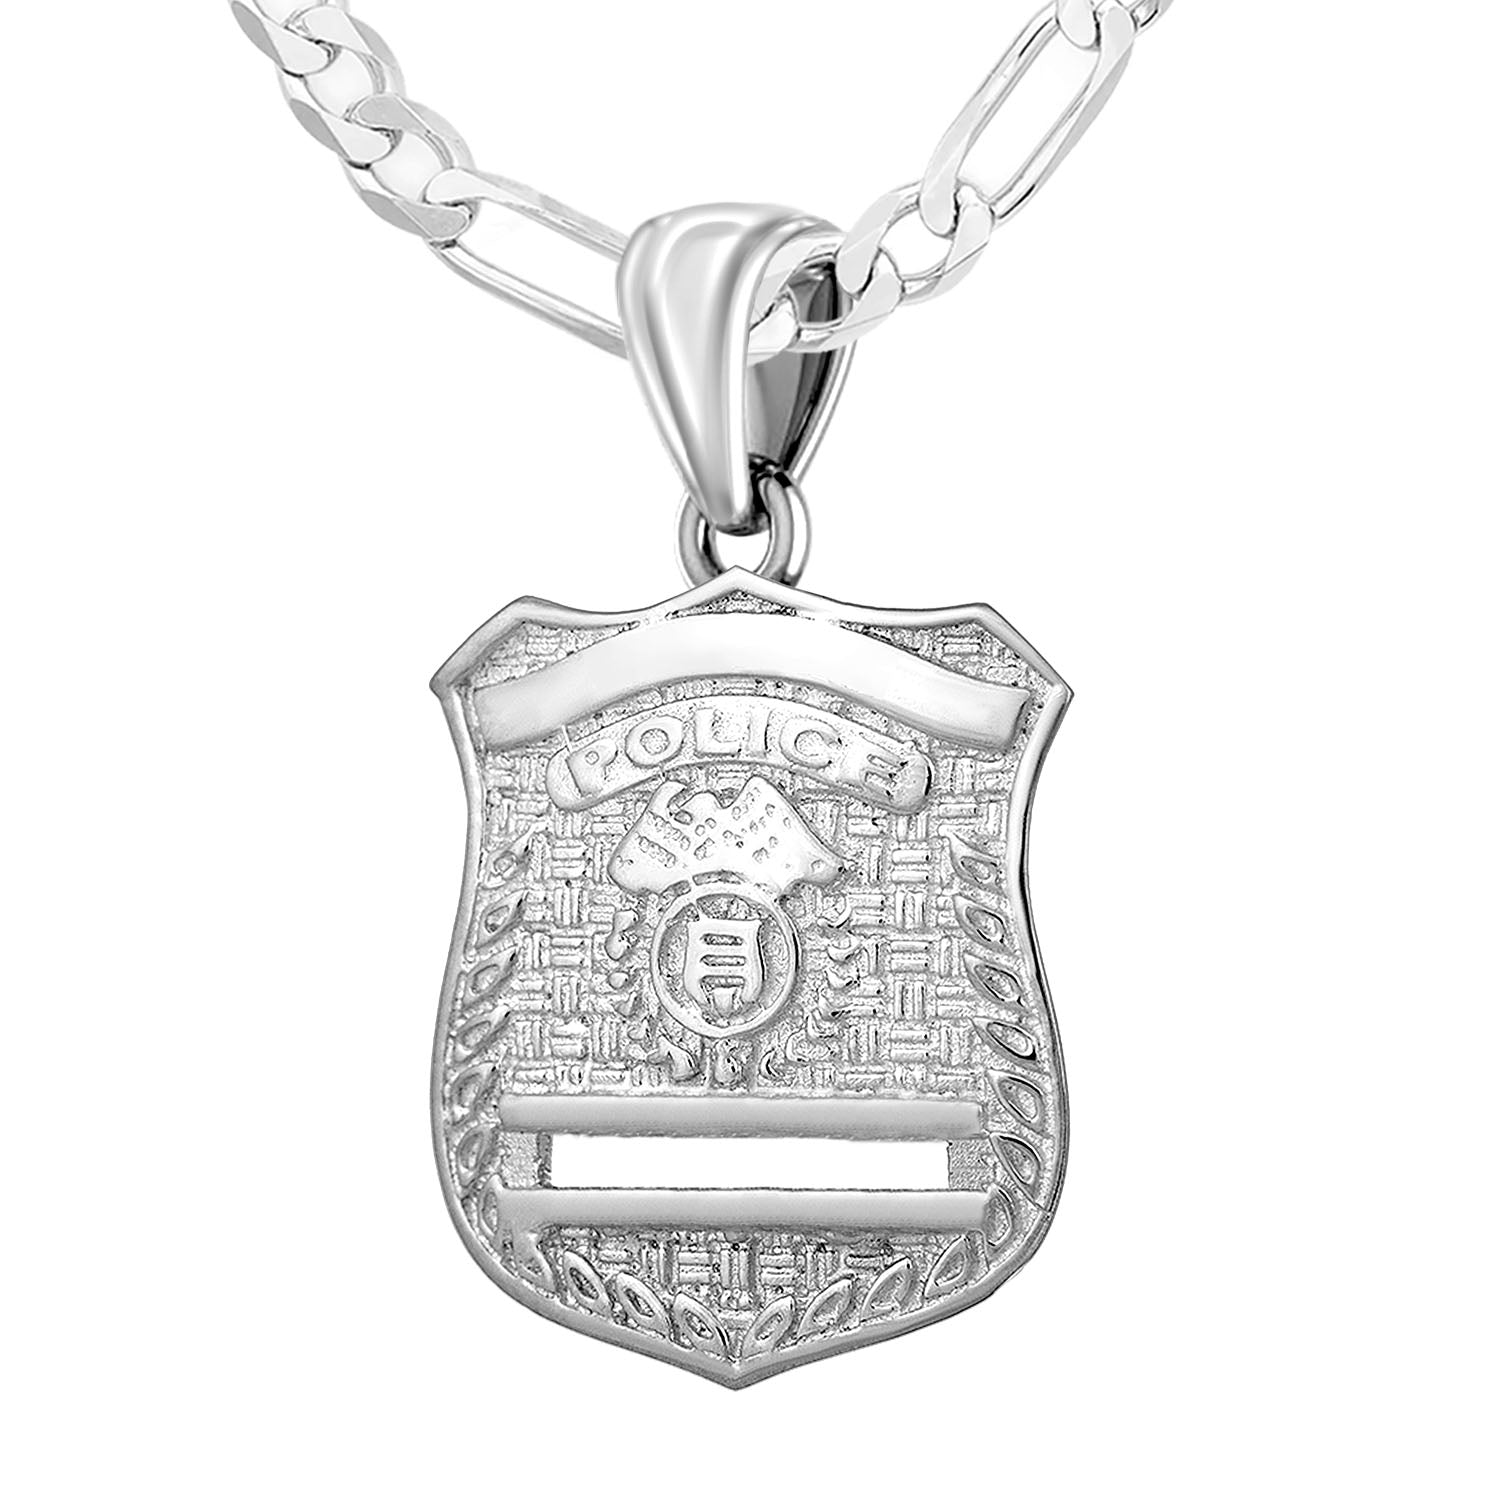 Men's 925 Sterling Silver Customizable Police Badge Pendant Necklace, 26mm - US Jewels